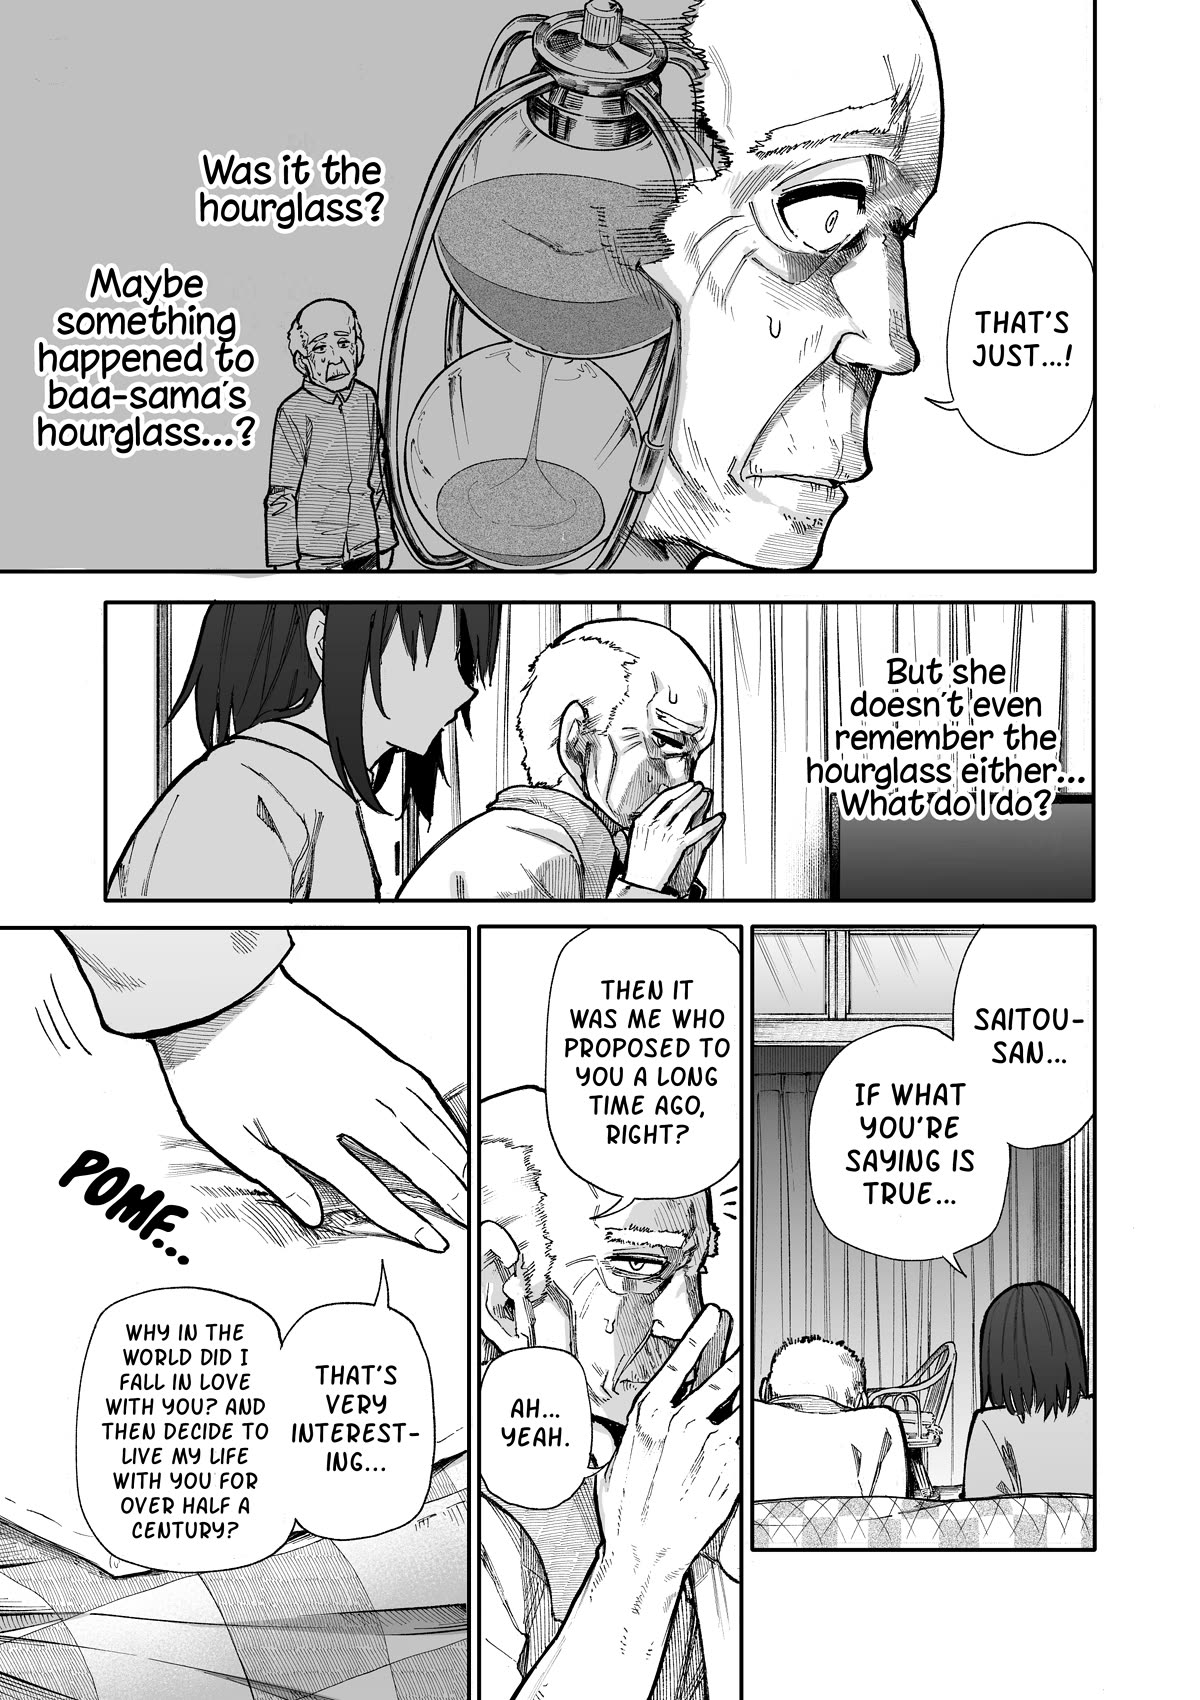 A Story About A Grampa And Granma Returned Back To Their Youth. - Page 3